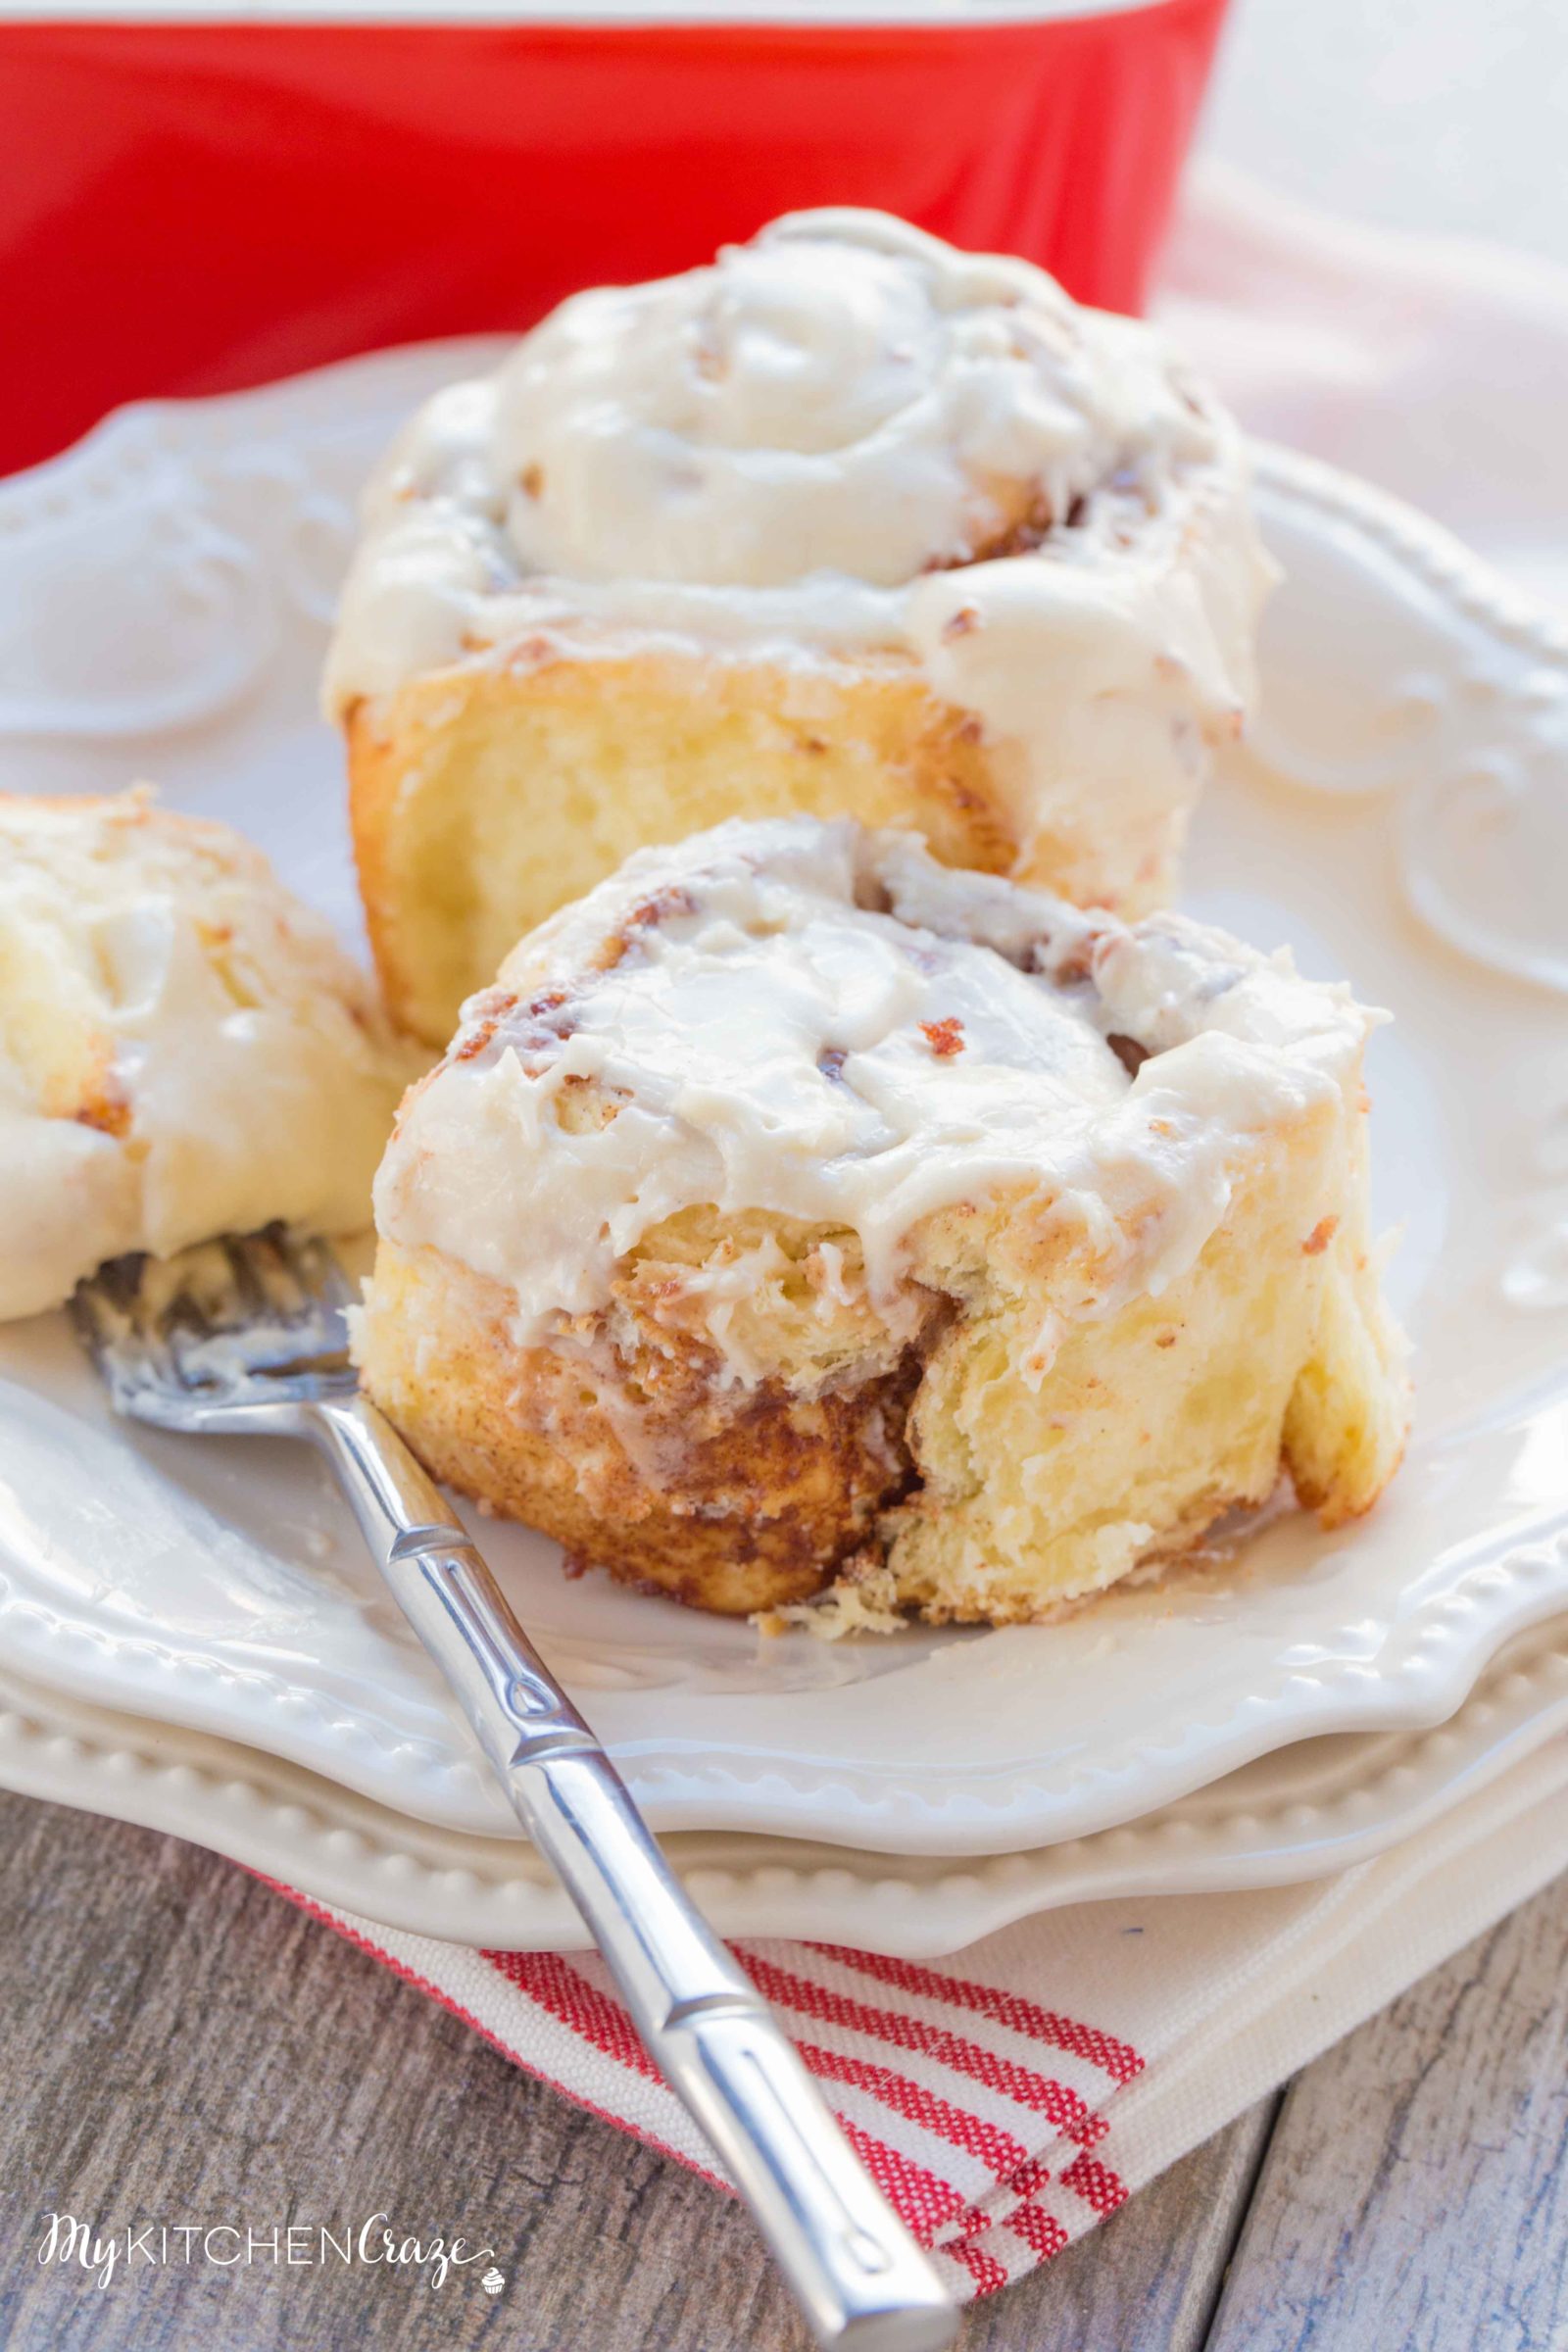 Classic Cinnamon Rolls ~ mykitchencraze.com ~ Wake up to the smell of a delicious moist cinnamon roll! Be sure to grab that cup of coffee.